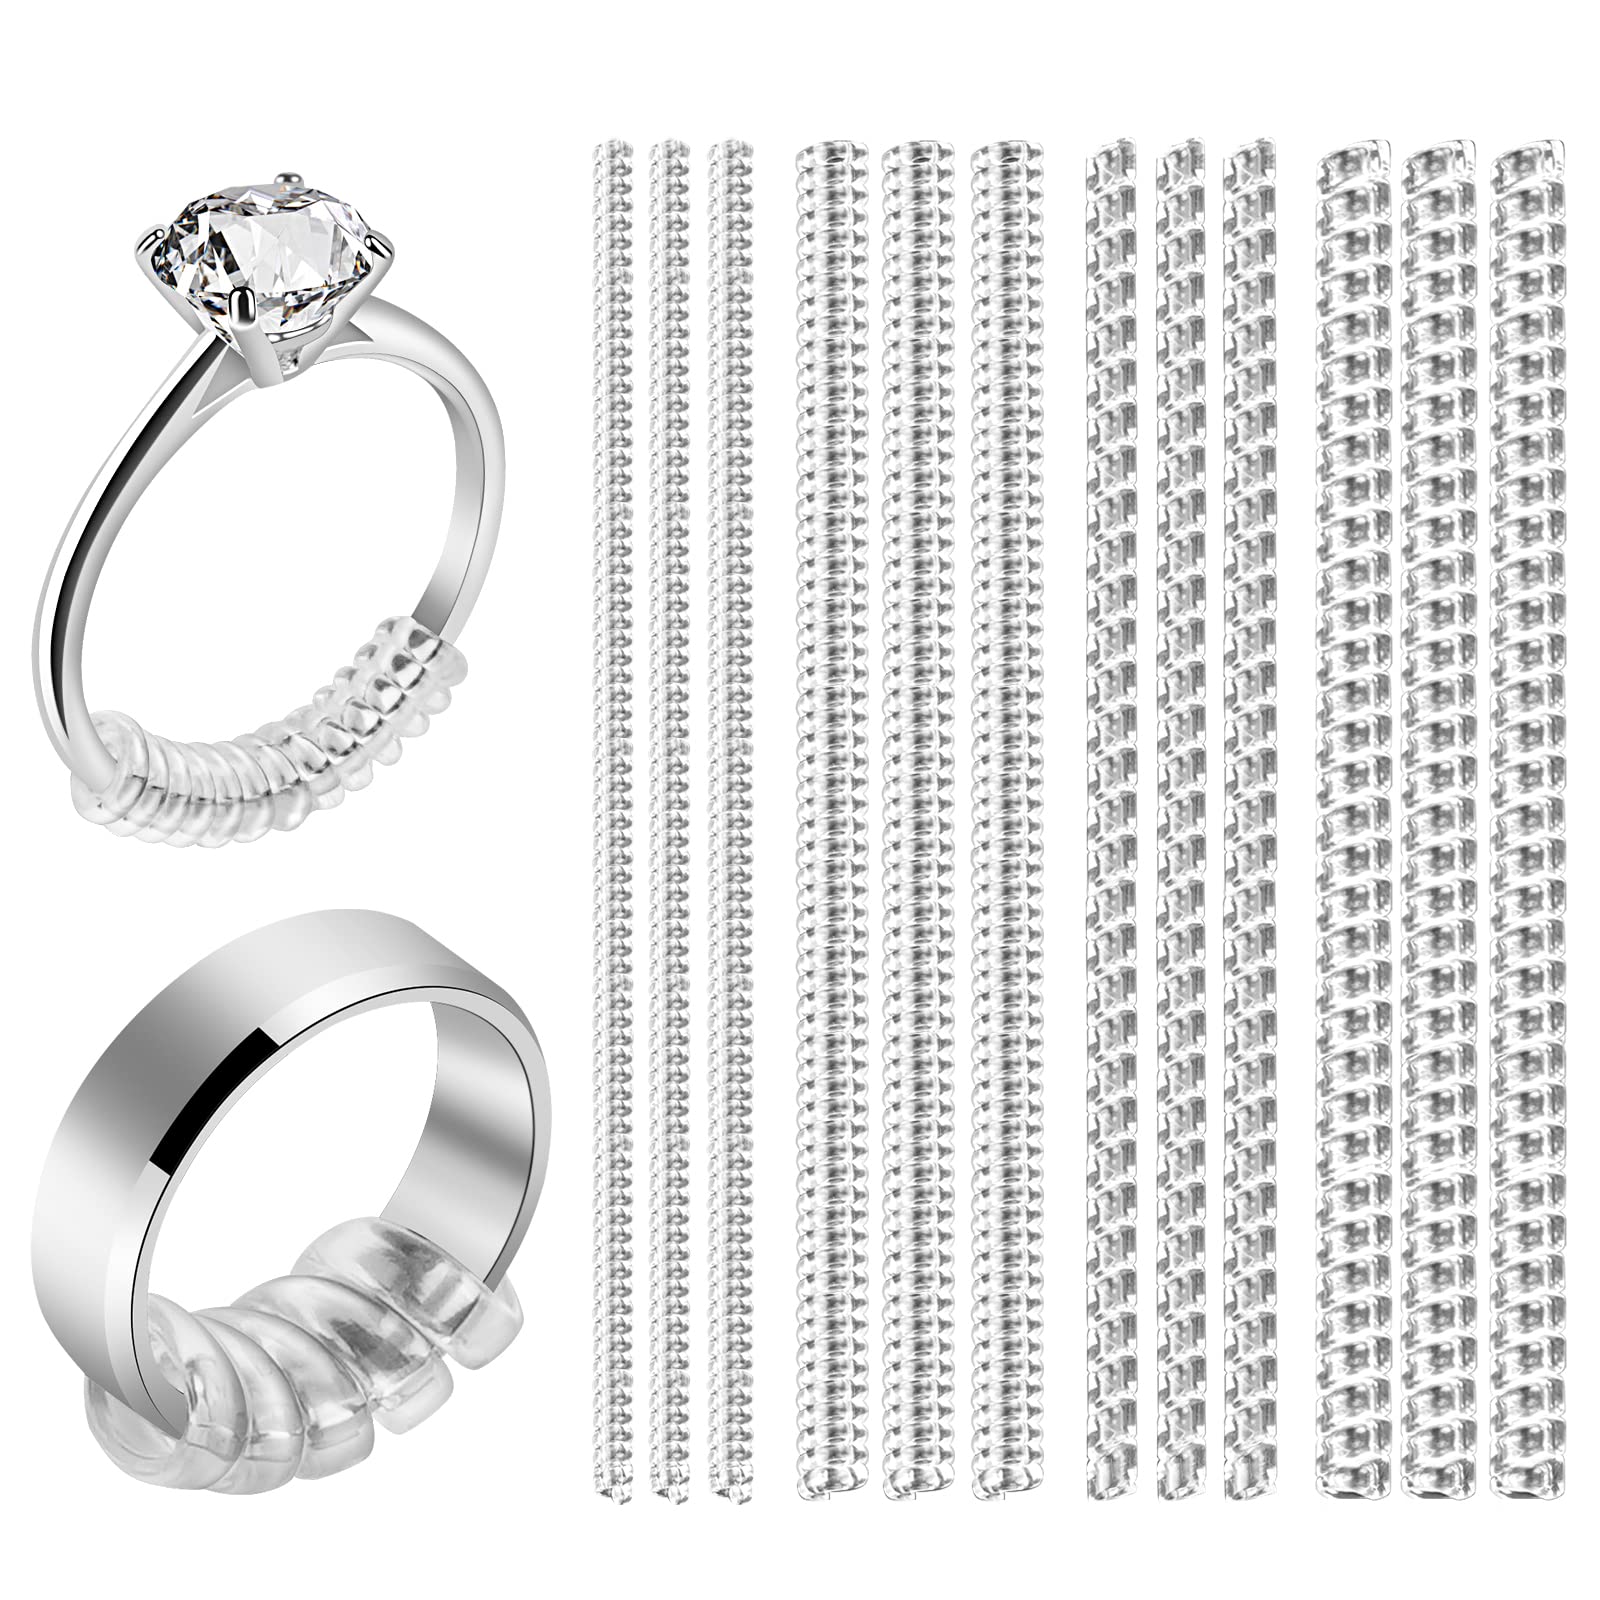 Postgrado  2pcs Ring Size Adjuster for Loose Rings Jewelry Guard Spacer  Sizer Fitter USA